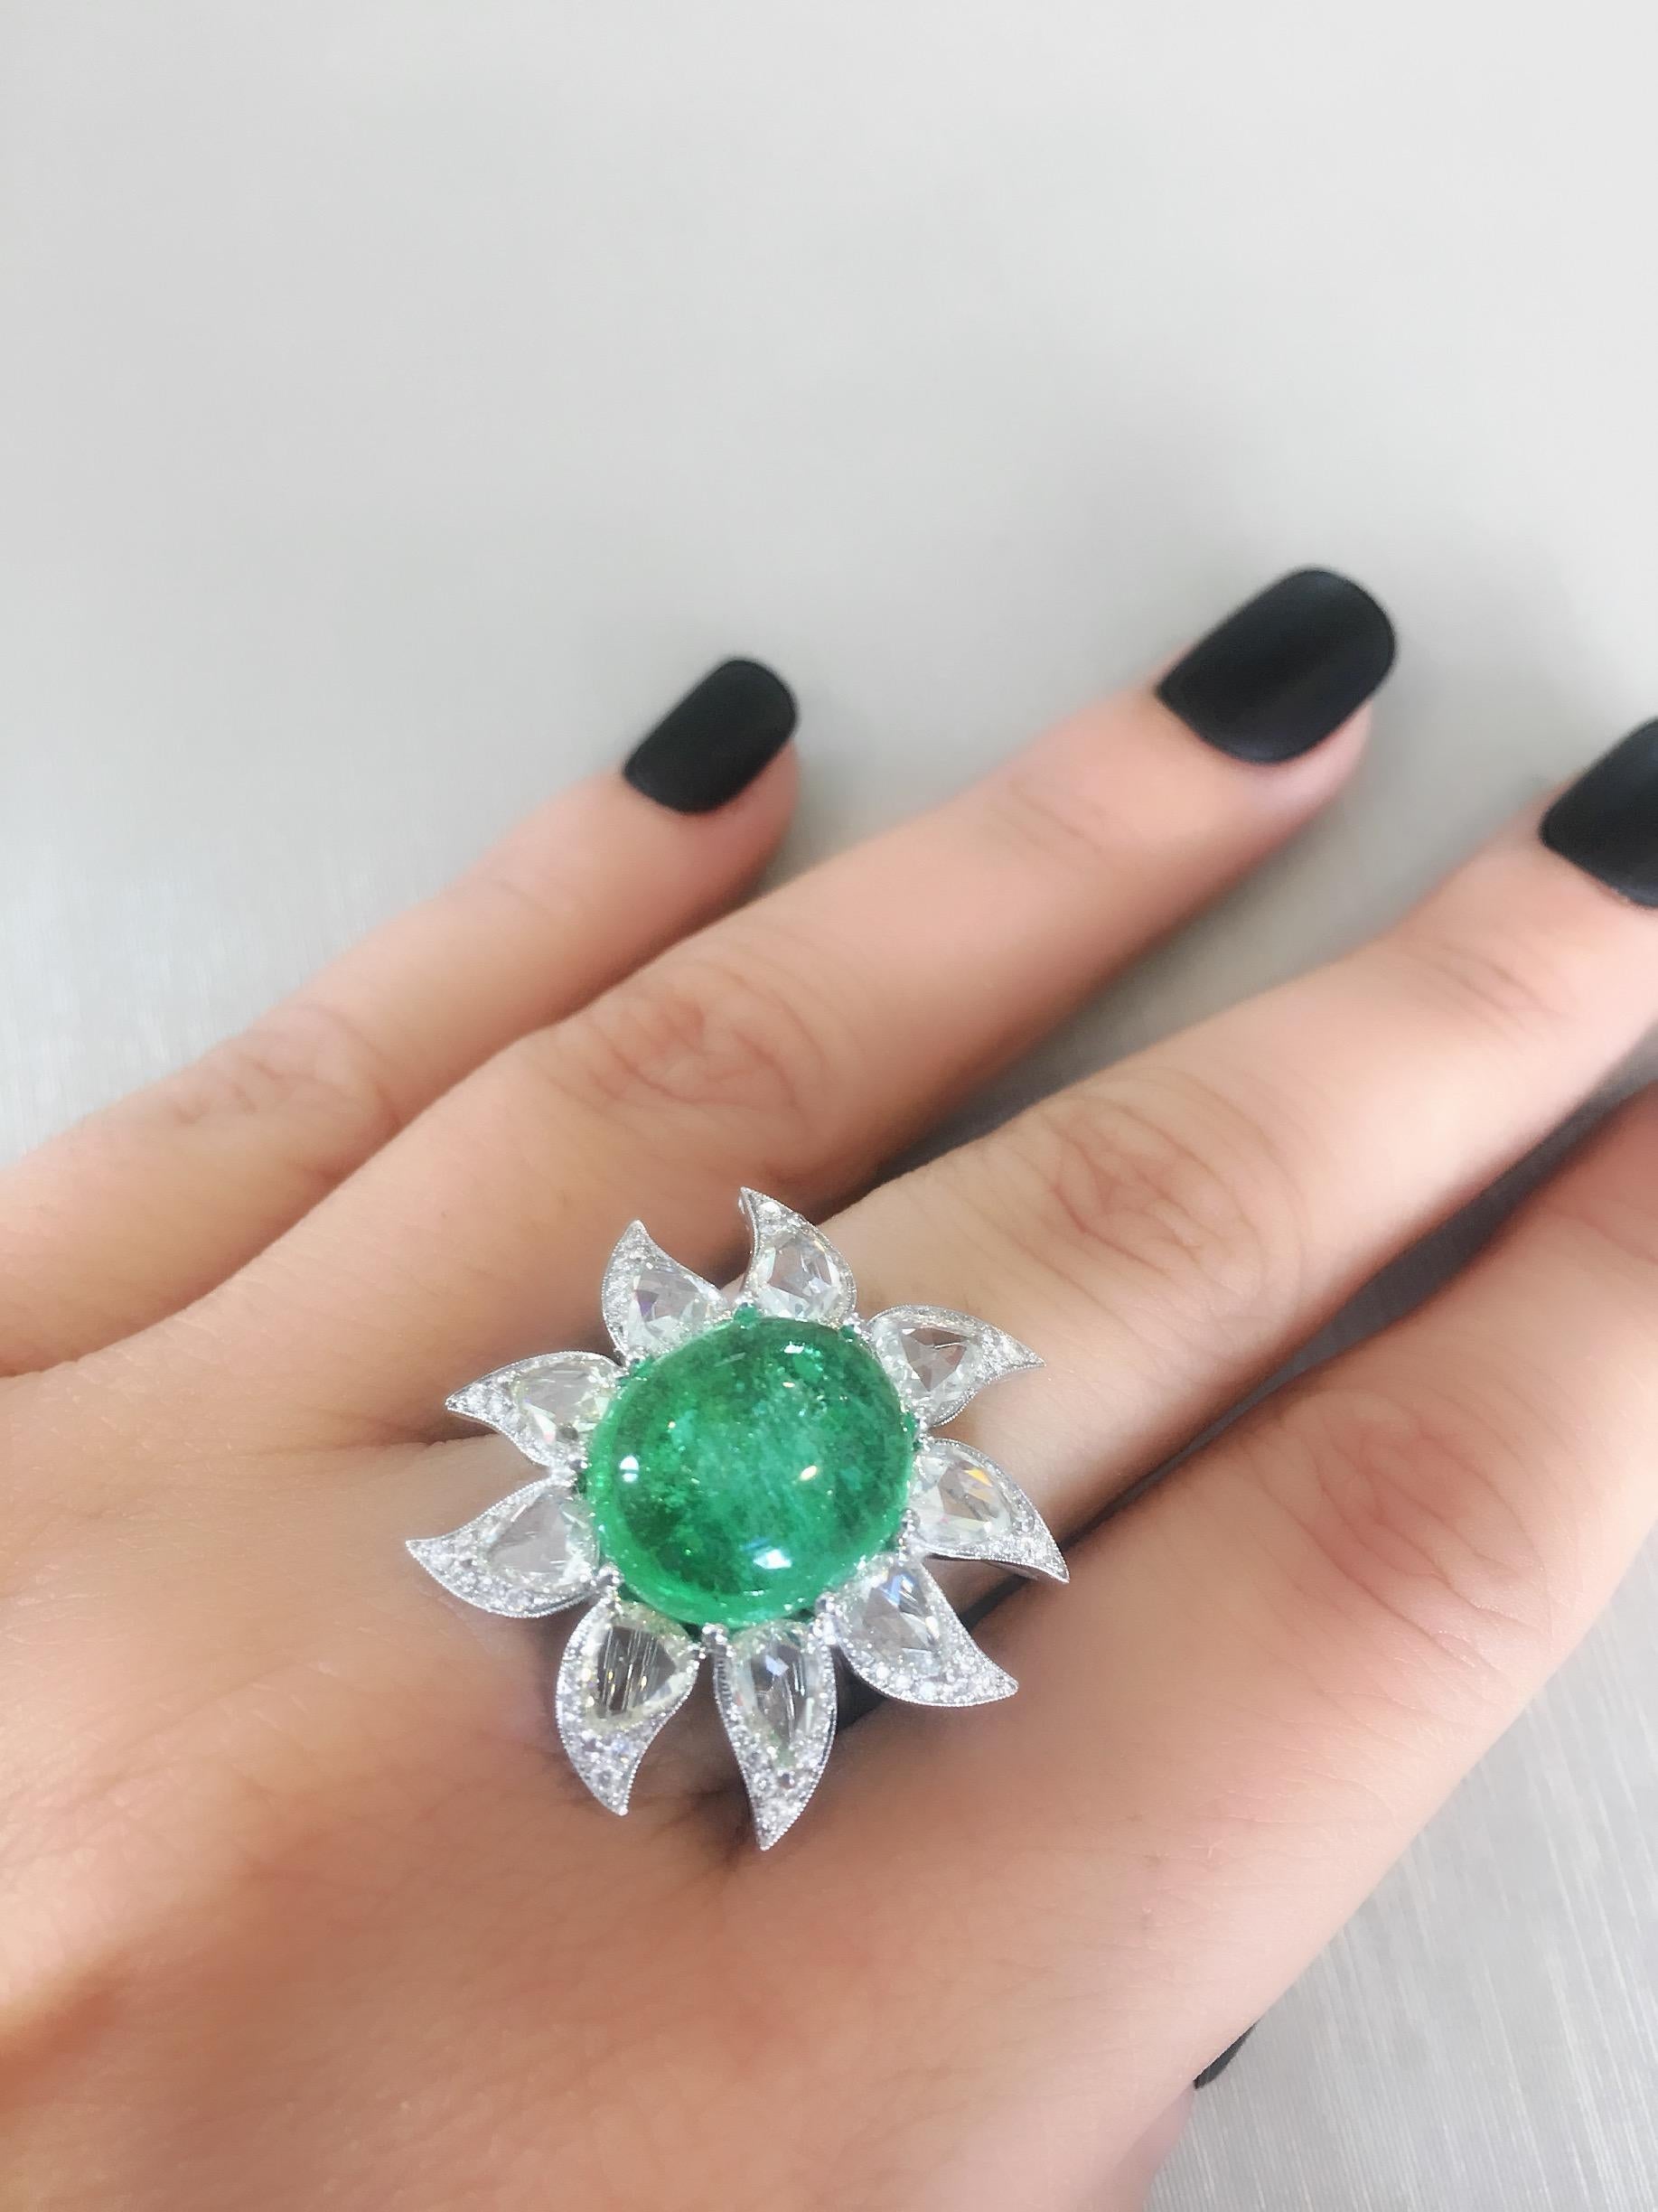 18 Karat White Gold ring from Paraiba Collection created by Monan with 8.45 carat paraiba tourmaline, 2.59 carats of pear-shaped rose cut diamonds and 68 brilliant cut diamonds with the total weight of 0.33 carats.                                   